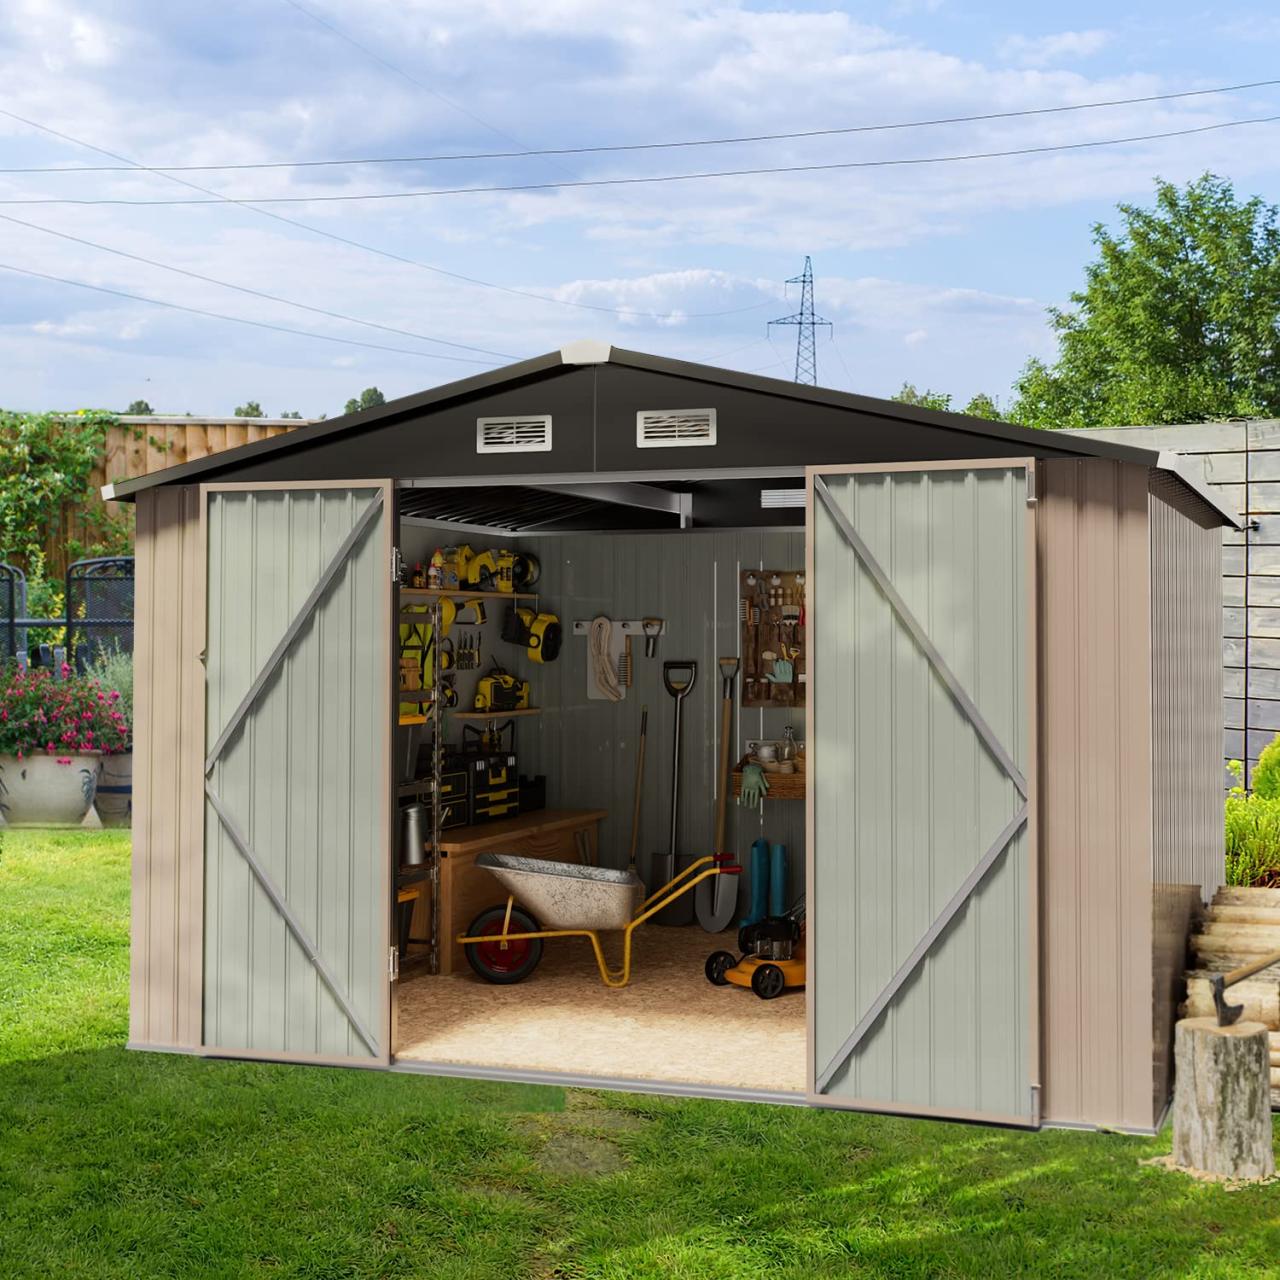 Amazon.Com : Aoxun Outdoor Shed - 8 X 10 Ft Storage Sheds Galvanized Metal  Shed With Air Vent And Slide Door, Tool Storage Backyard Shed Bike Shed,  Tiny House Garden Tool Storage